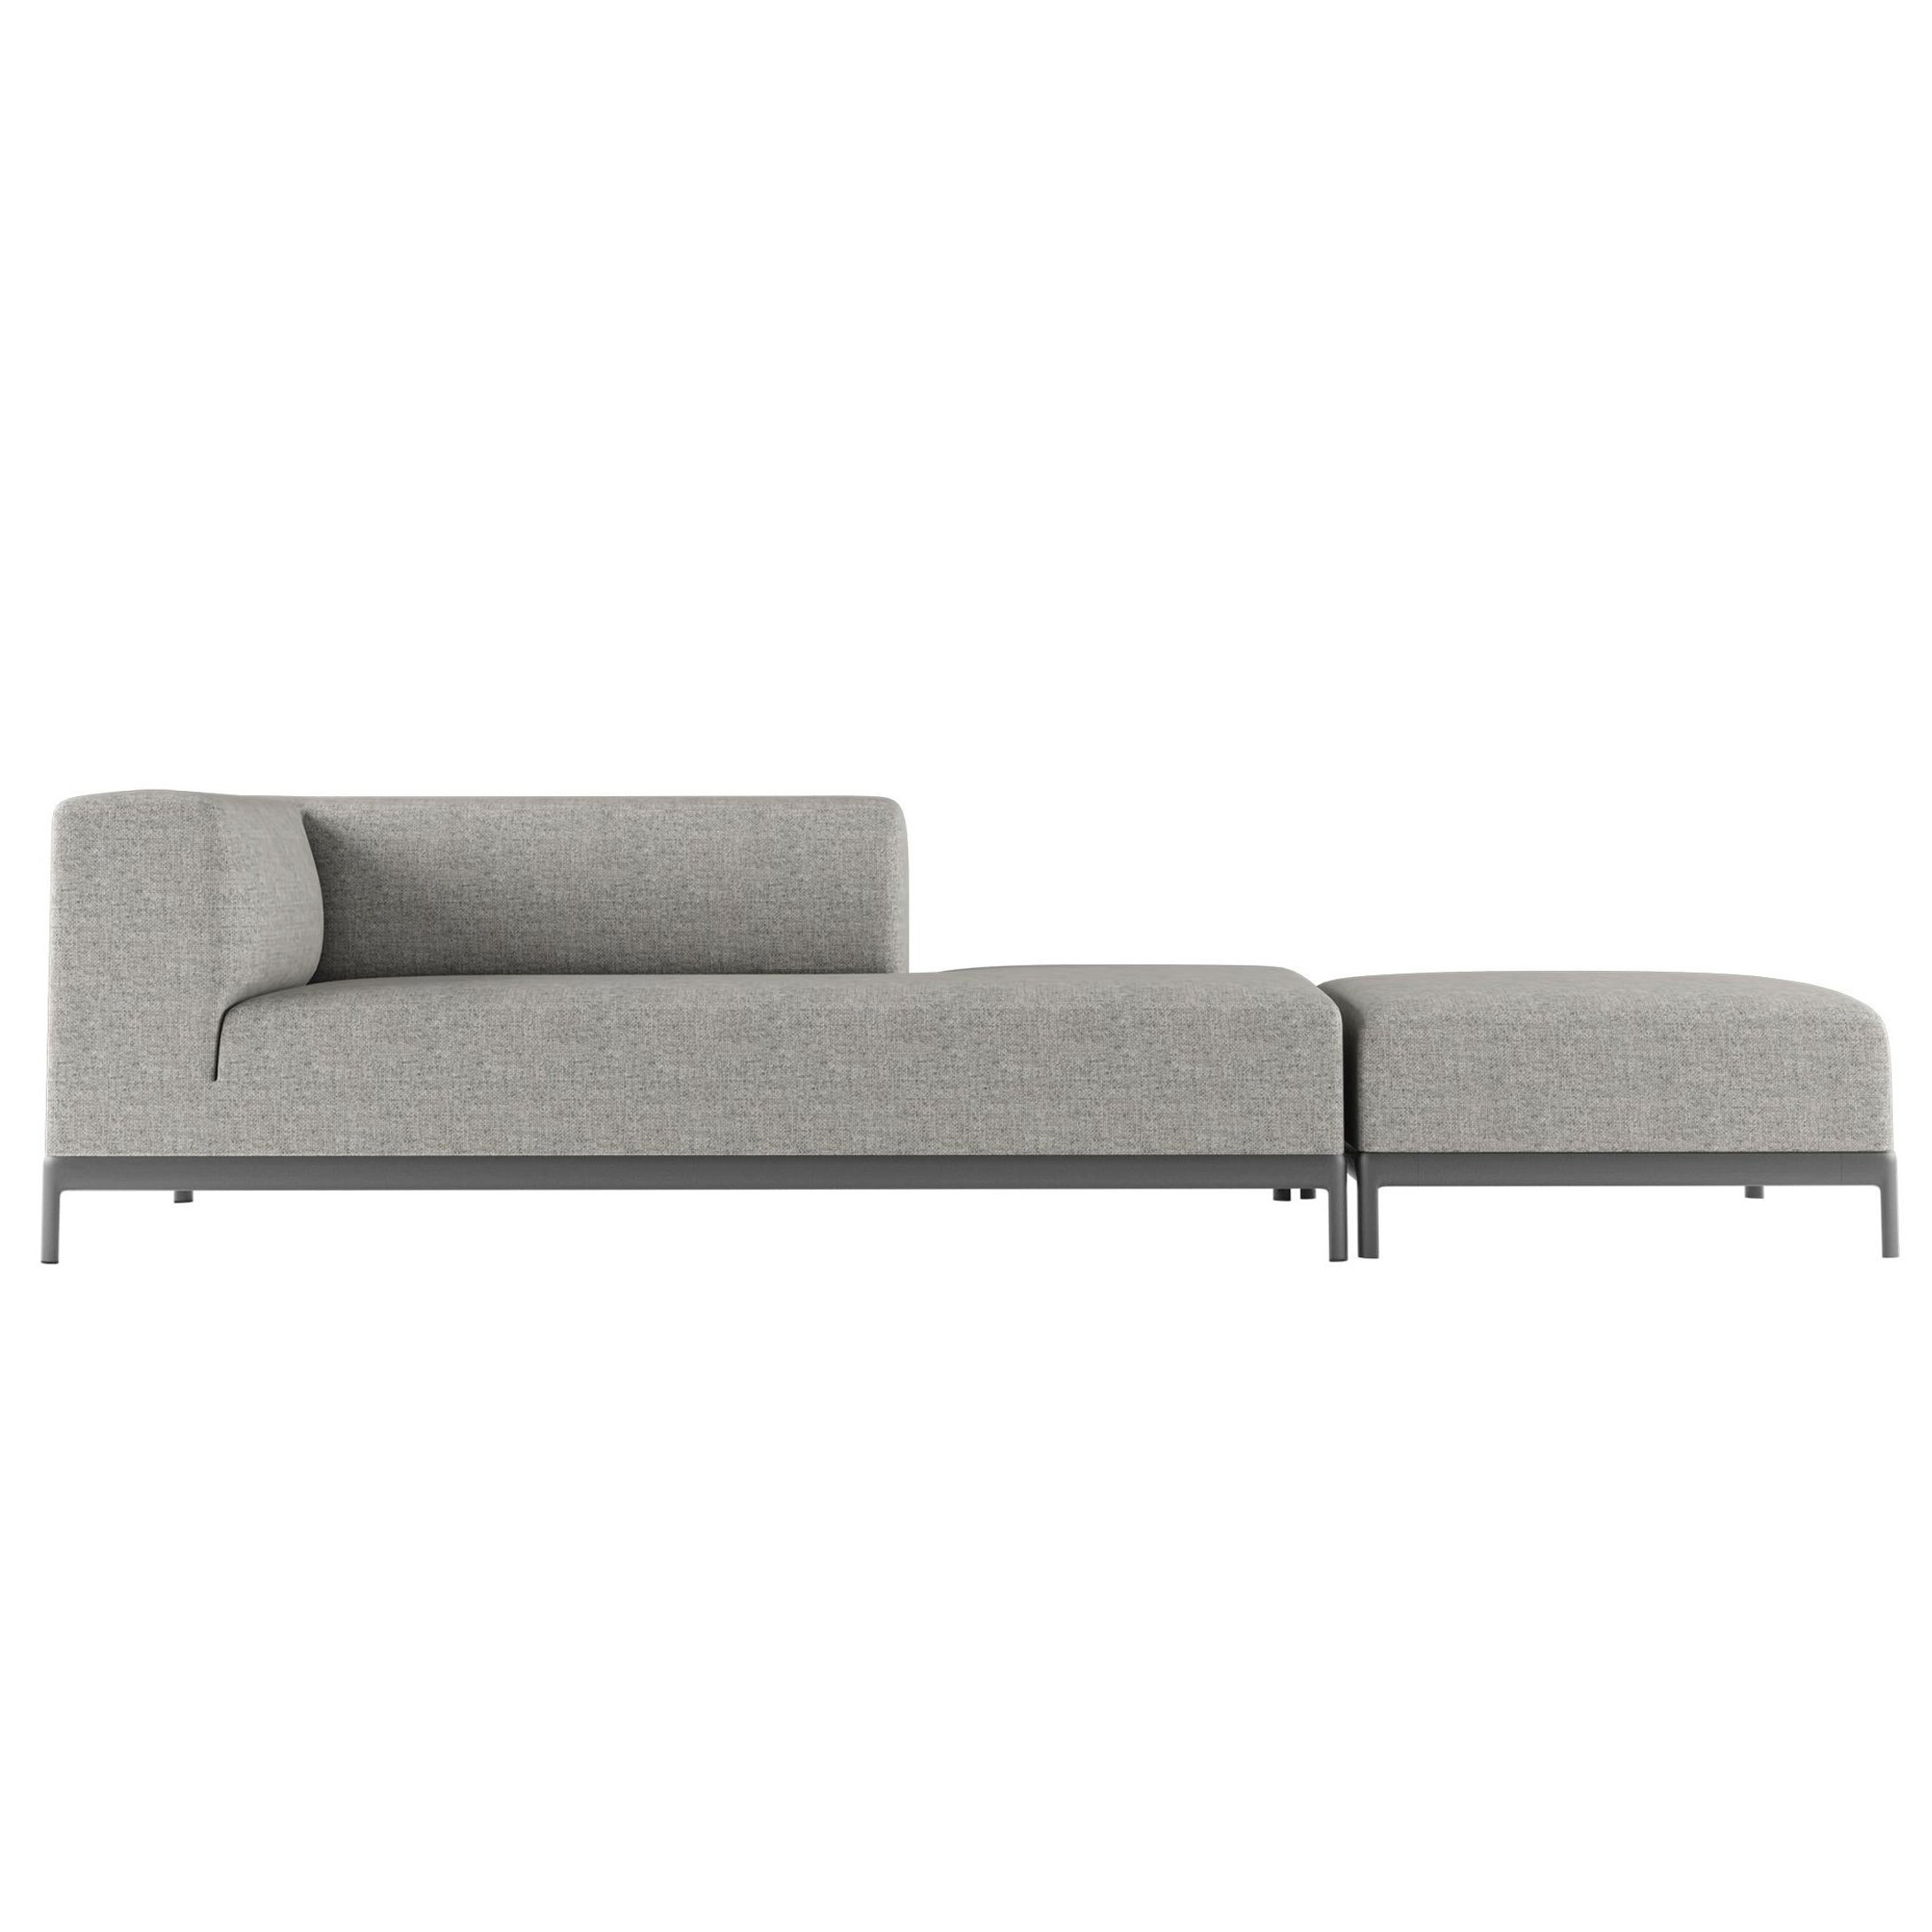 Alias P64+P70 AluZen Soft Sofa Set in Upholstery with Lacquered Aluminium Frame For Sale